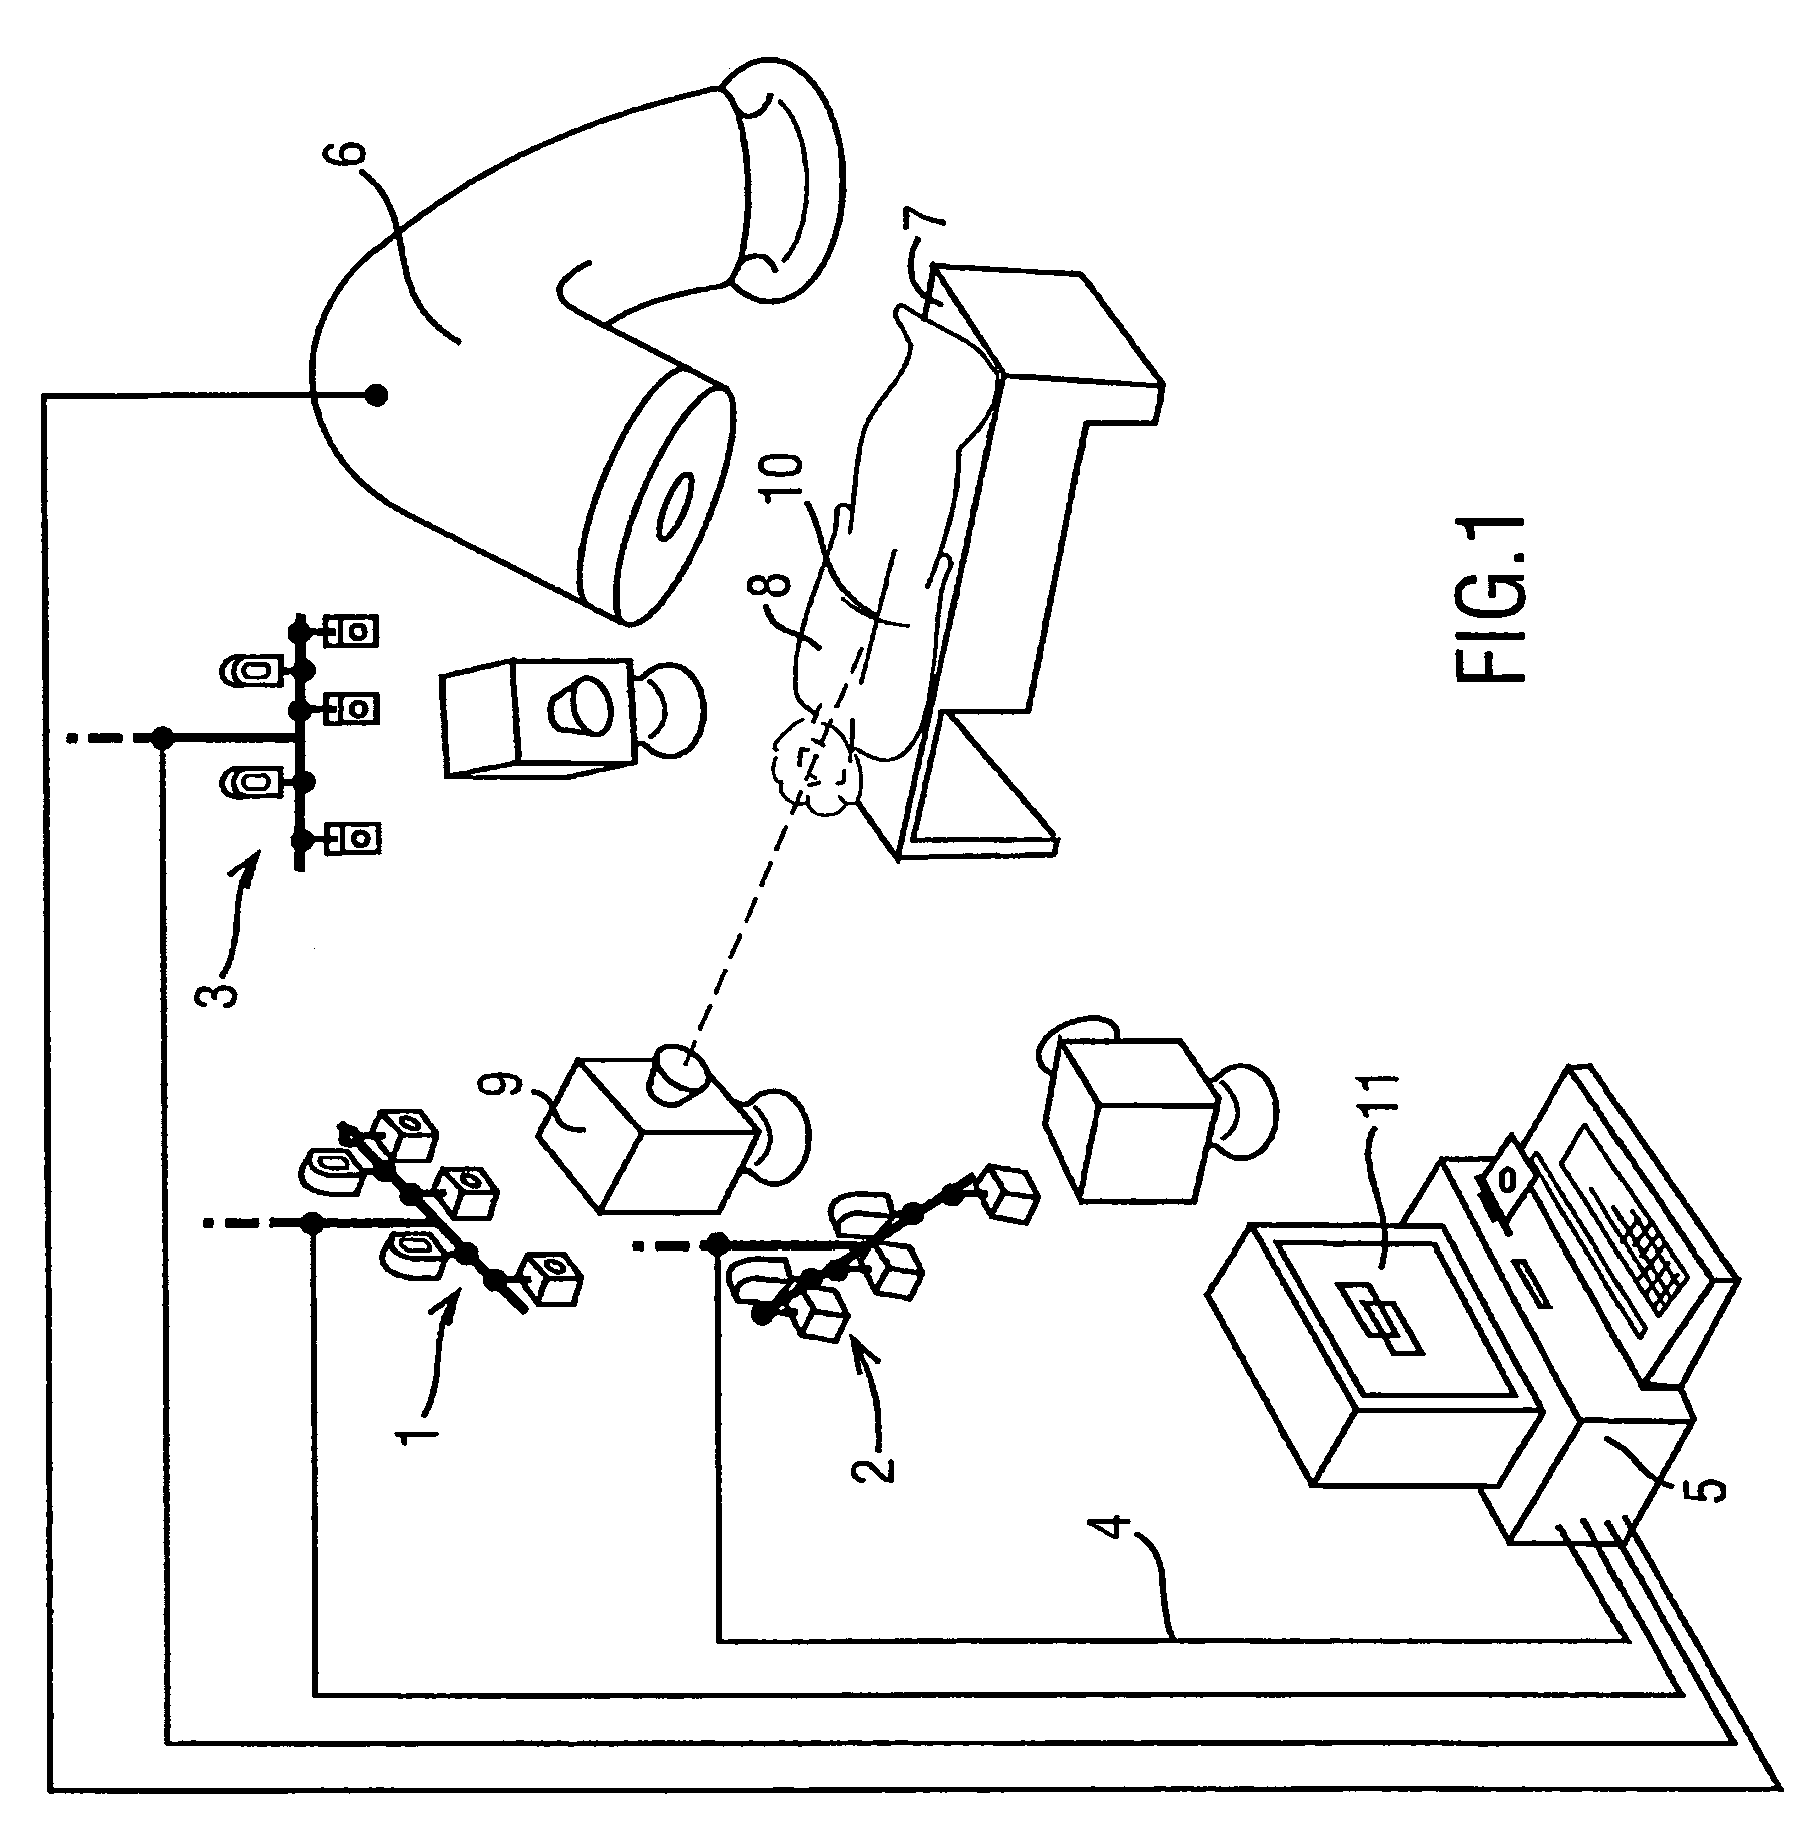 Image processing system for use with a patient positioning device